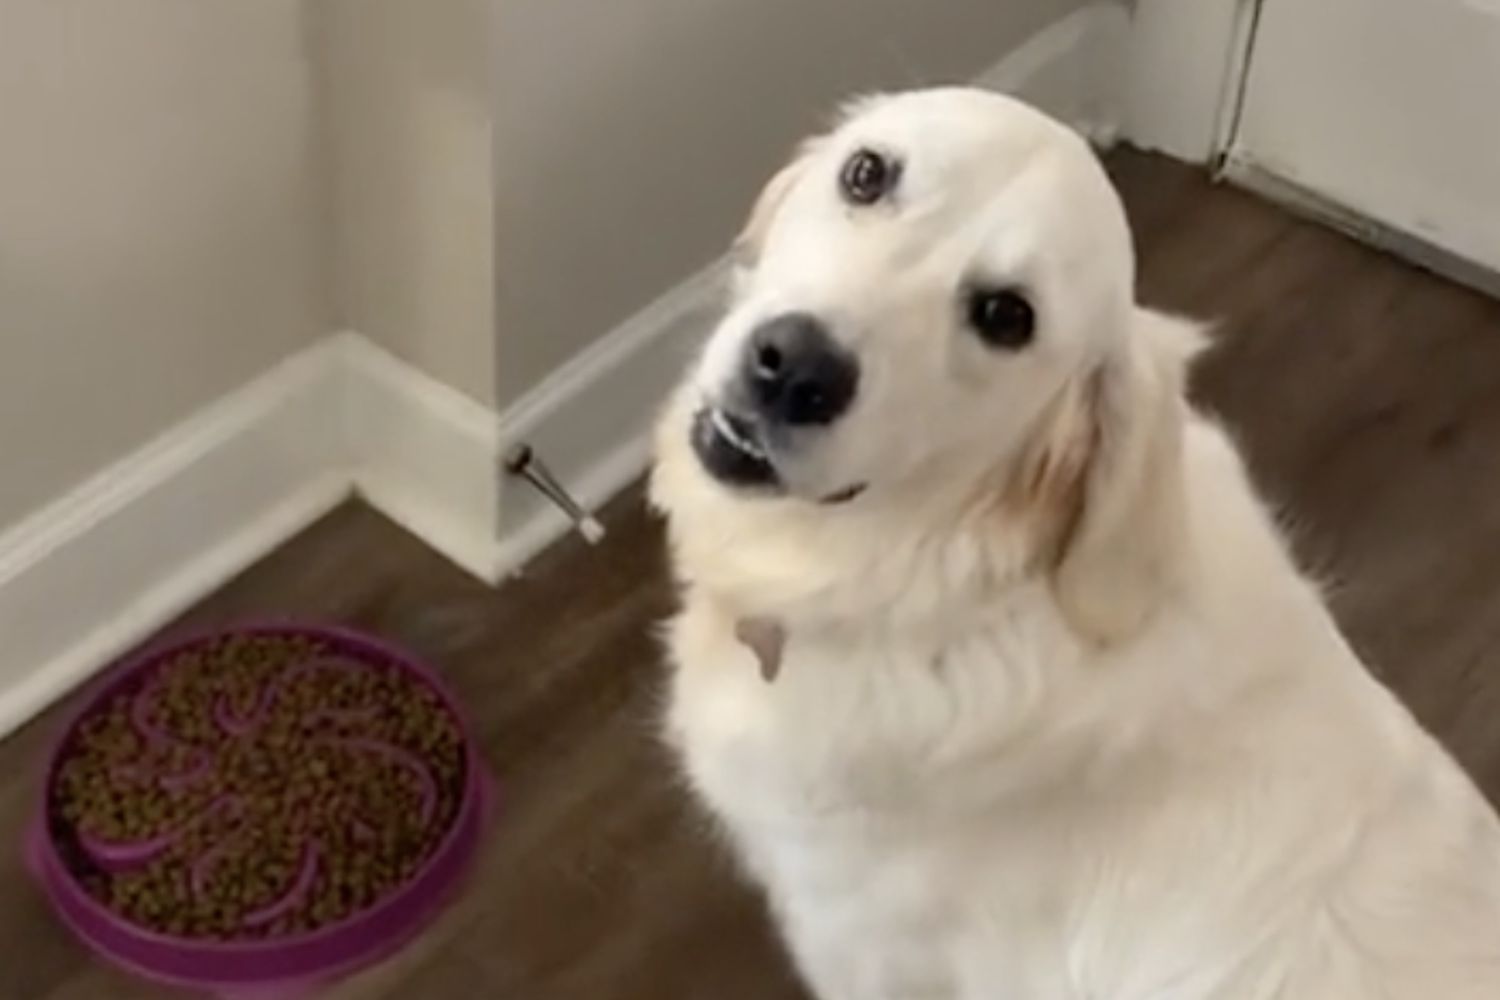 a light colored golden retriever-type dog sits in front of a purple slow feeder bowl while looking directly at camera